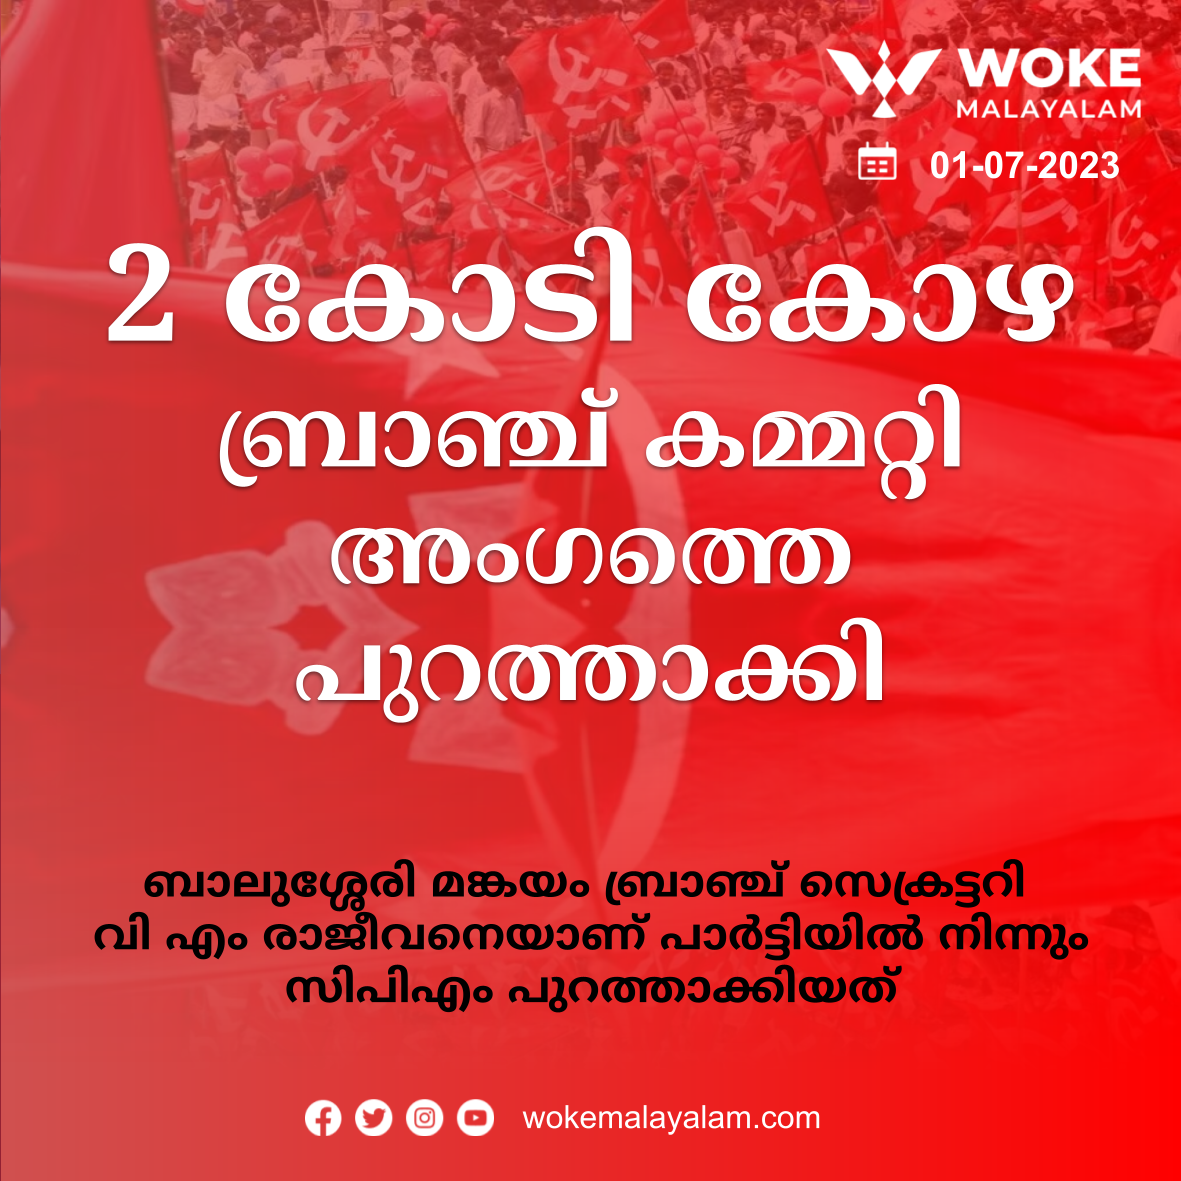 cpm sacked the branch committee member who demanded 2 crore bribe from the quarry owner